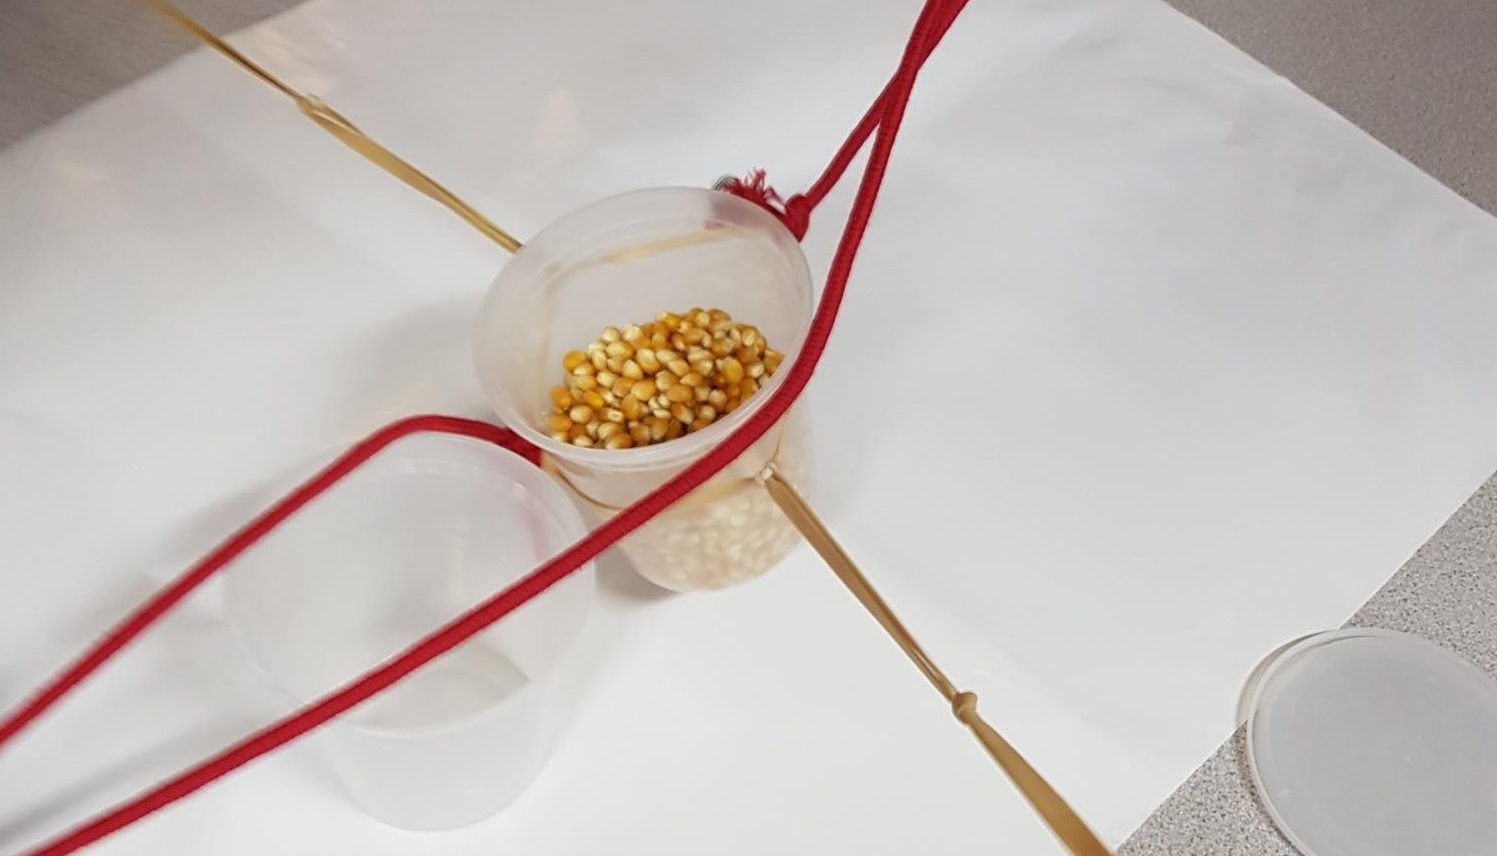 A container with Popcorn kernals inside is being pulled by pieces of string.